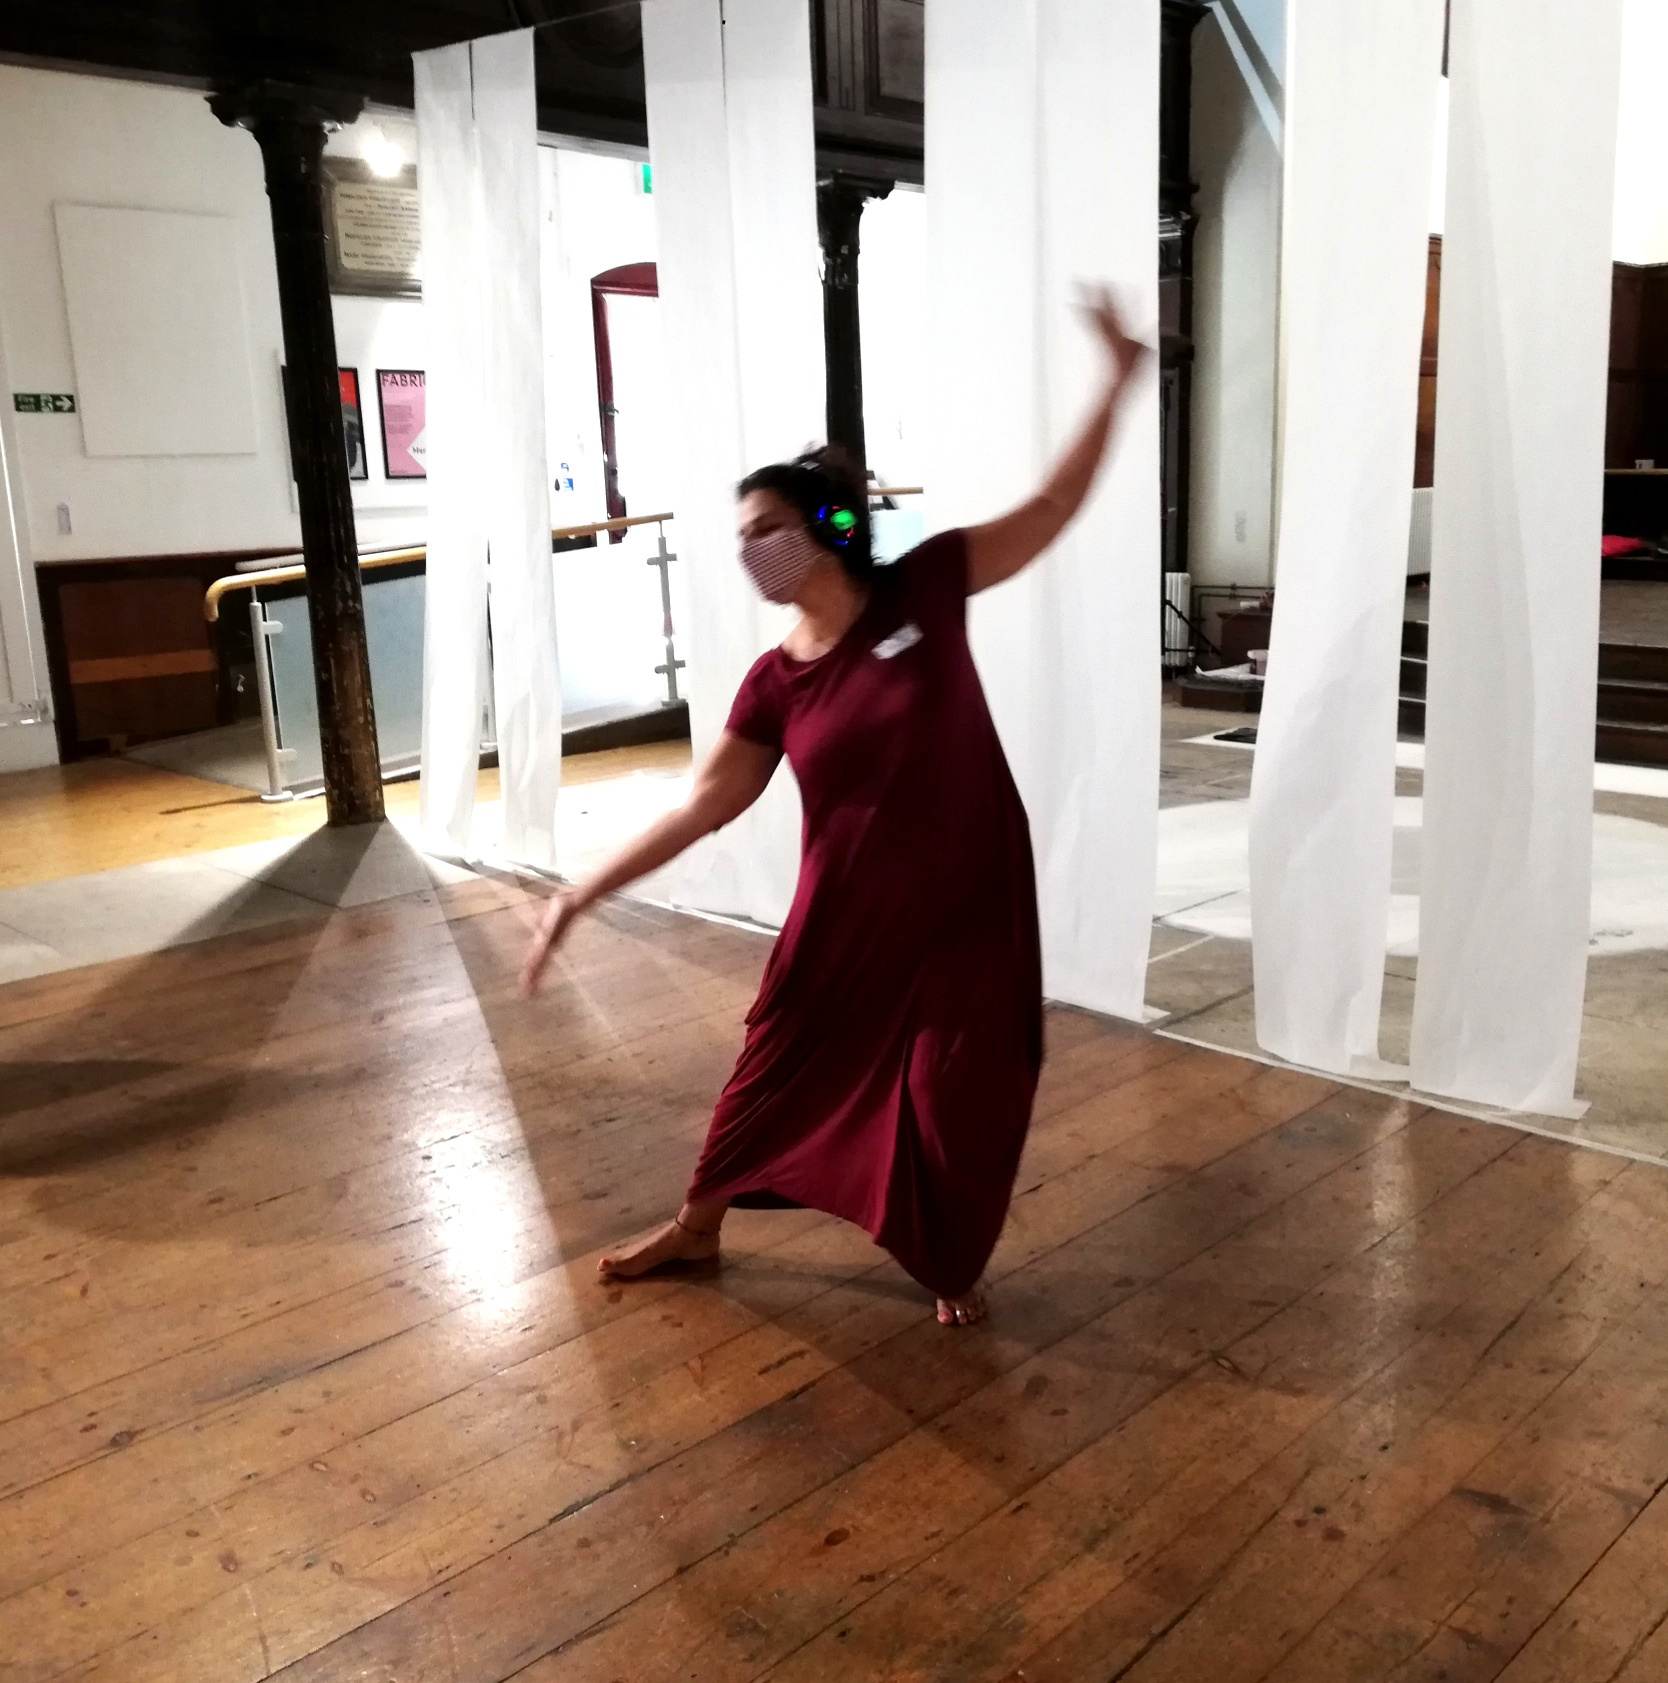 One of the project participants is improvising to sounds coming over her headphones. She is captured in a lovely pose -one arm is lifted high, the other is low, with her right foot out and the weight on her left bended leg. She is wearing on long red dress